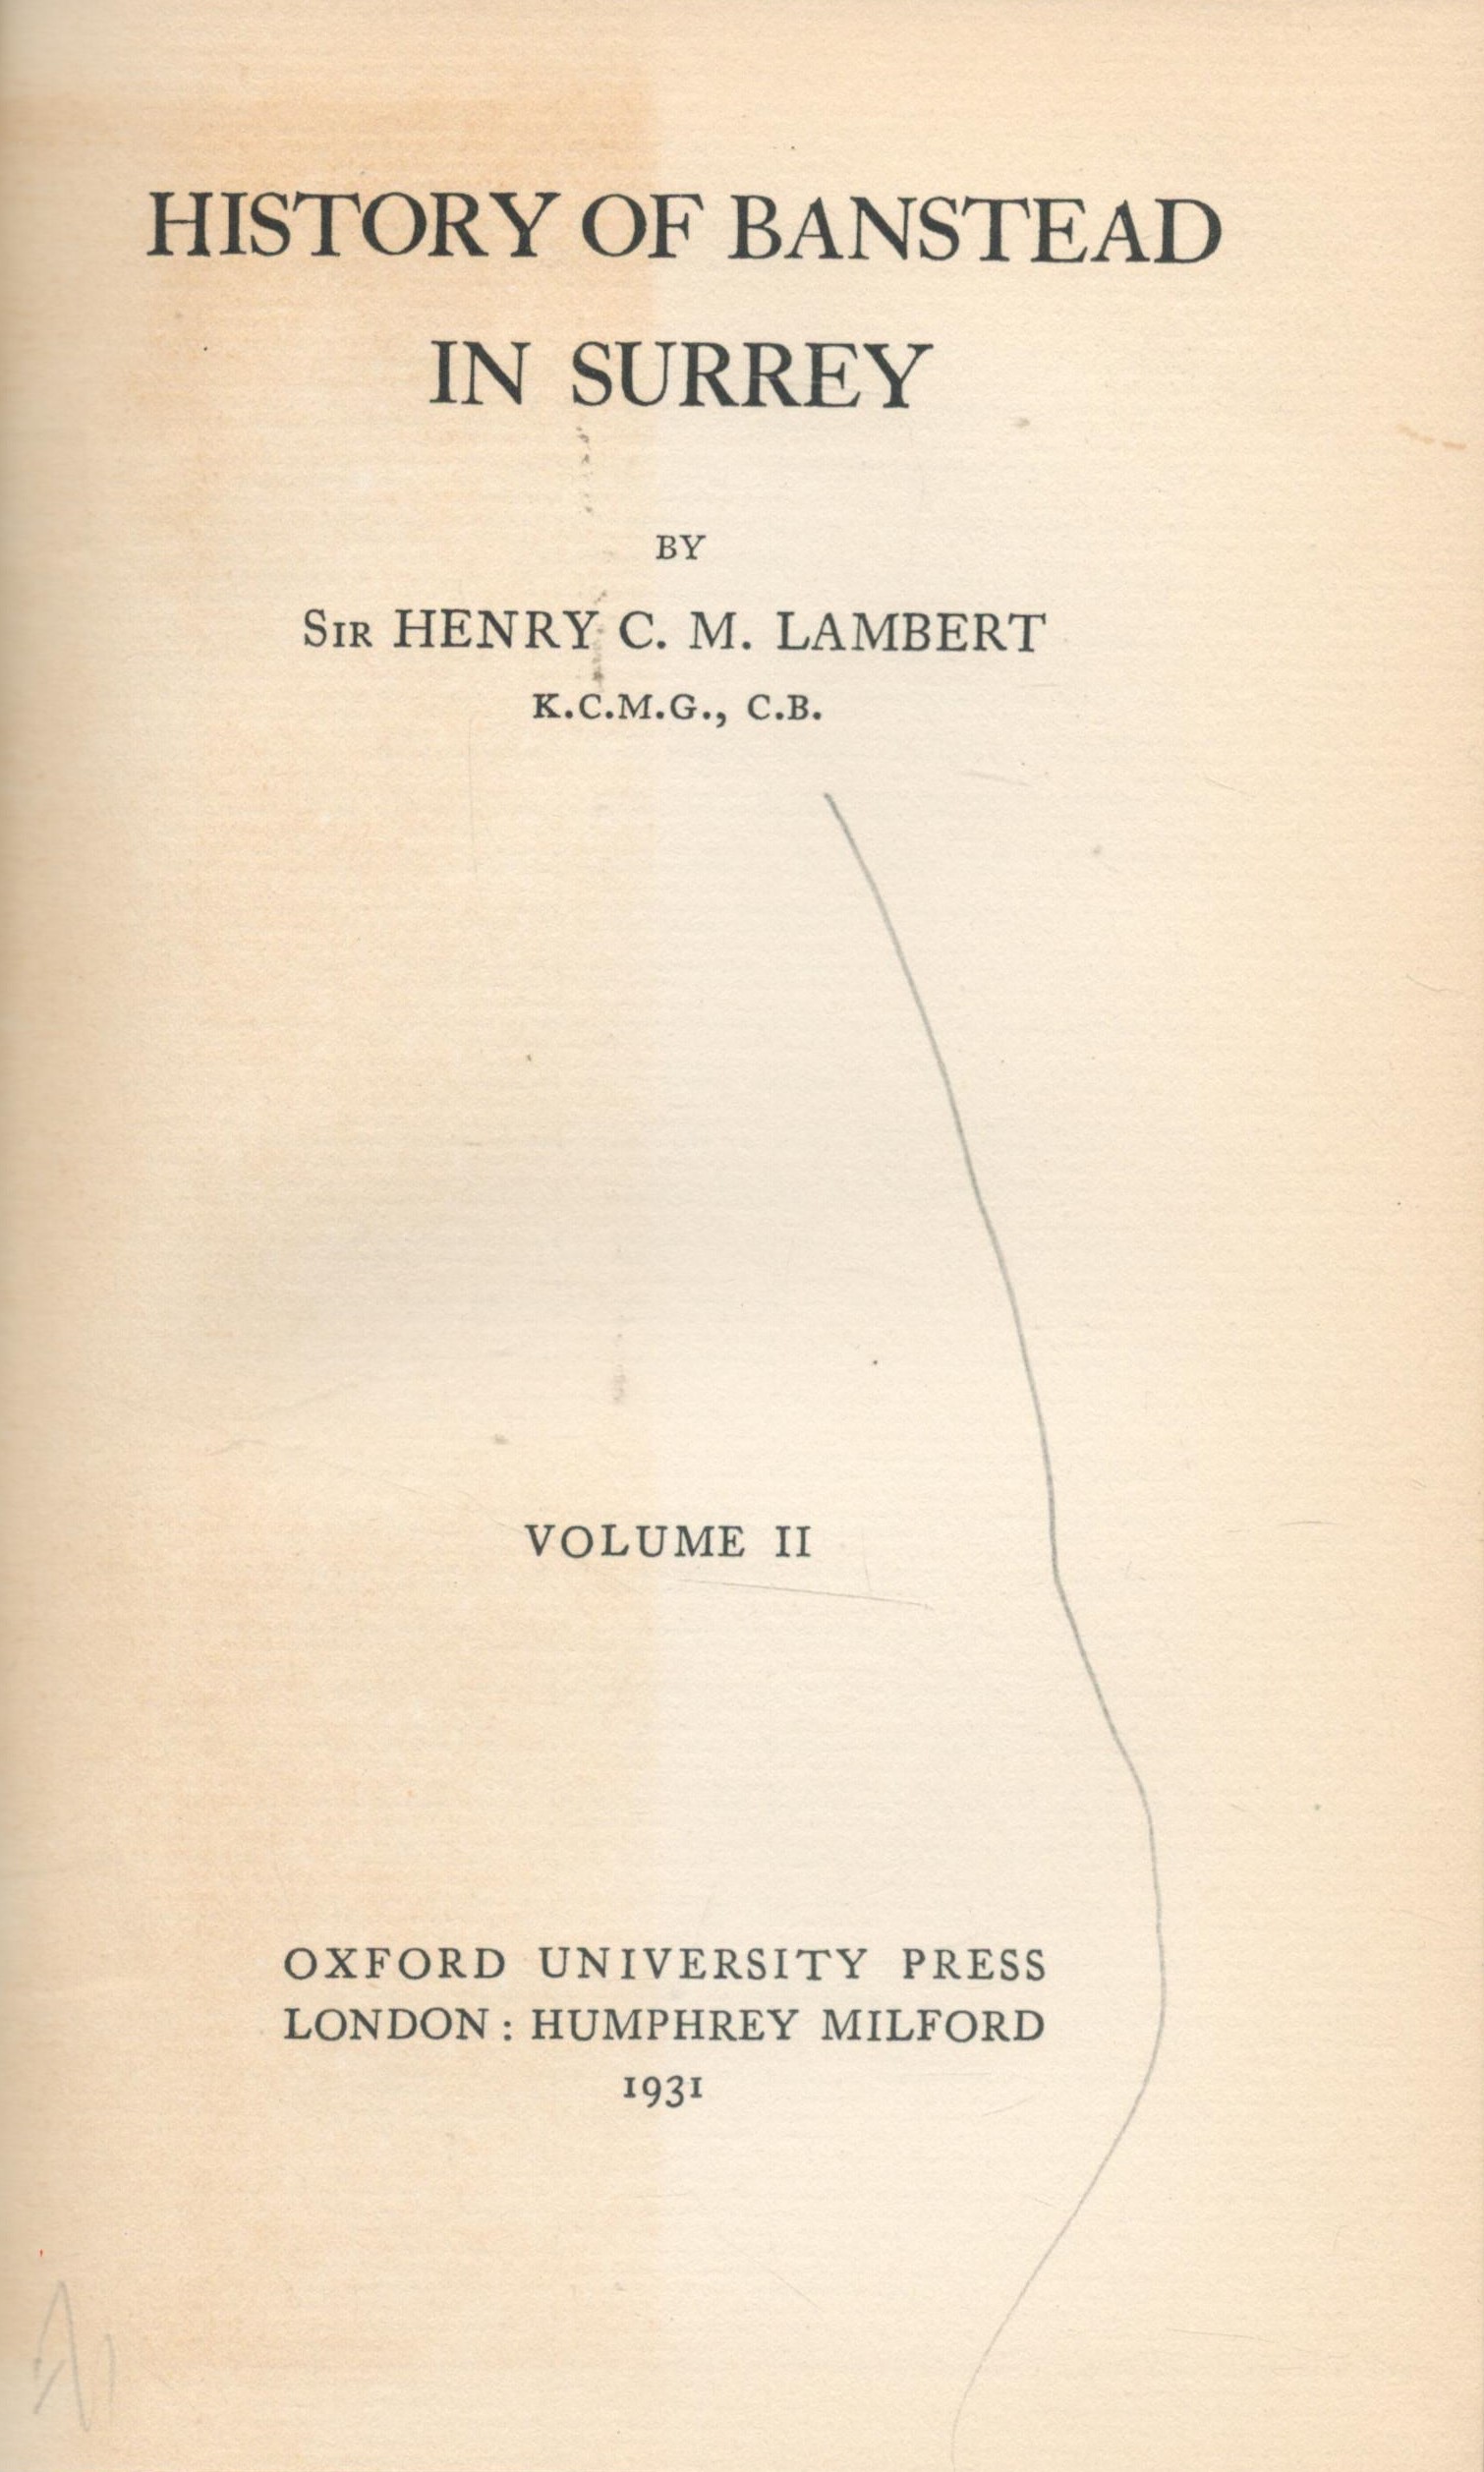 History of Banstead in Surrey by Sir Henry C M Lambert vol II 1931 edition unknown Hardback Book - Image 2 of 3